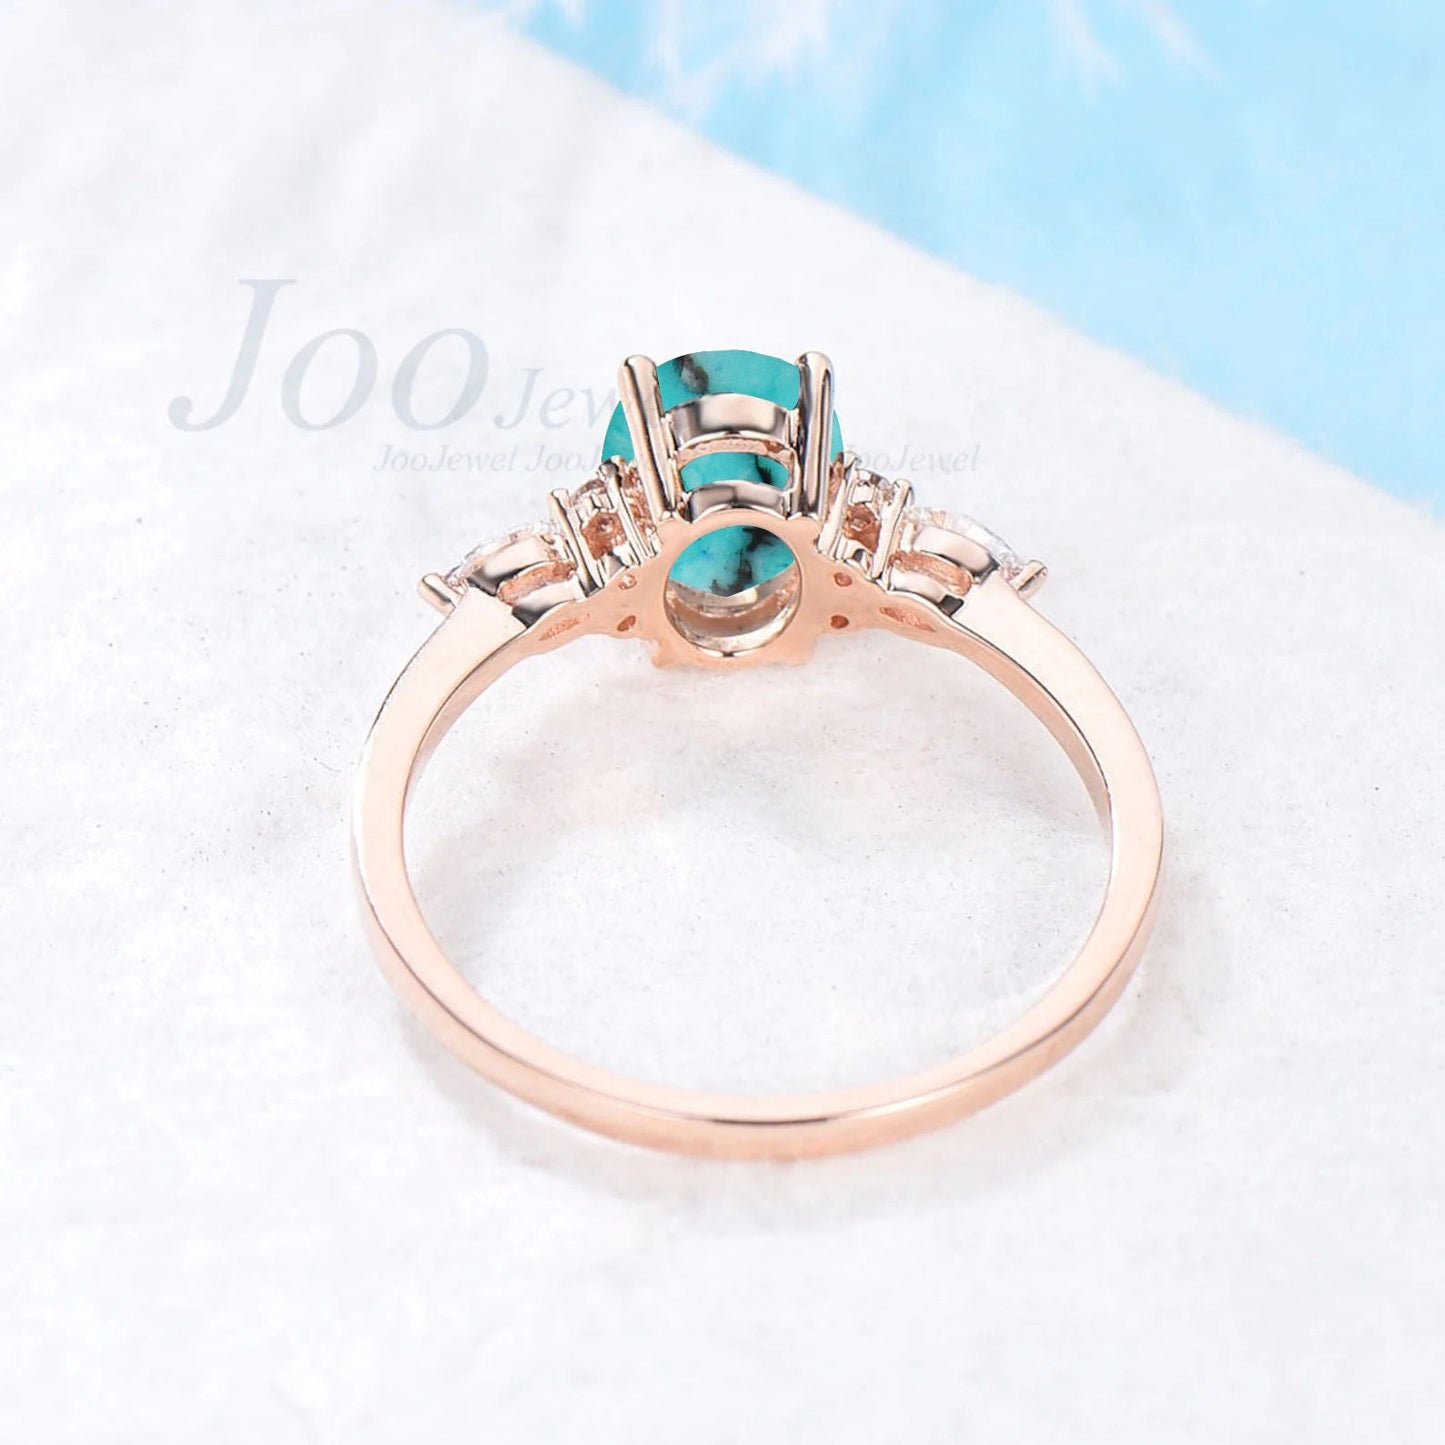 Oval Turquoise Engagement Ring Women Boho Style Sterling Silver Antique Turquoise Ring December Birthstone Ring Turquoise Gemstone Jewelry